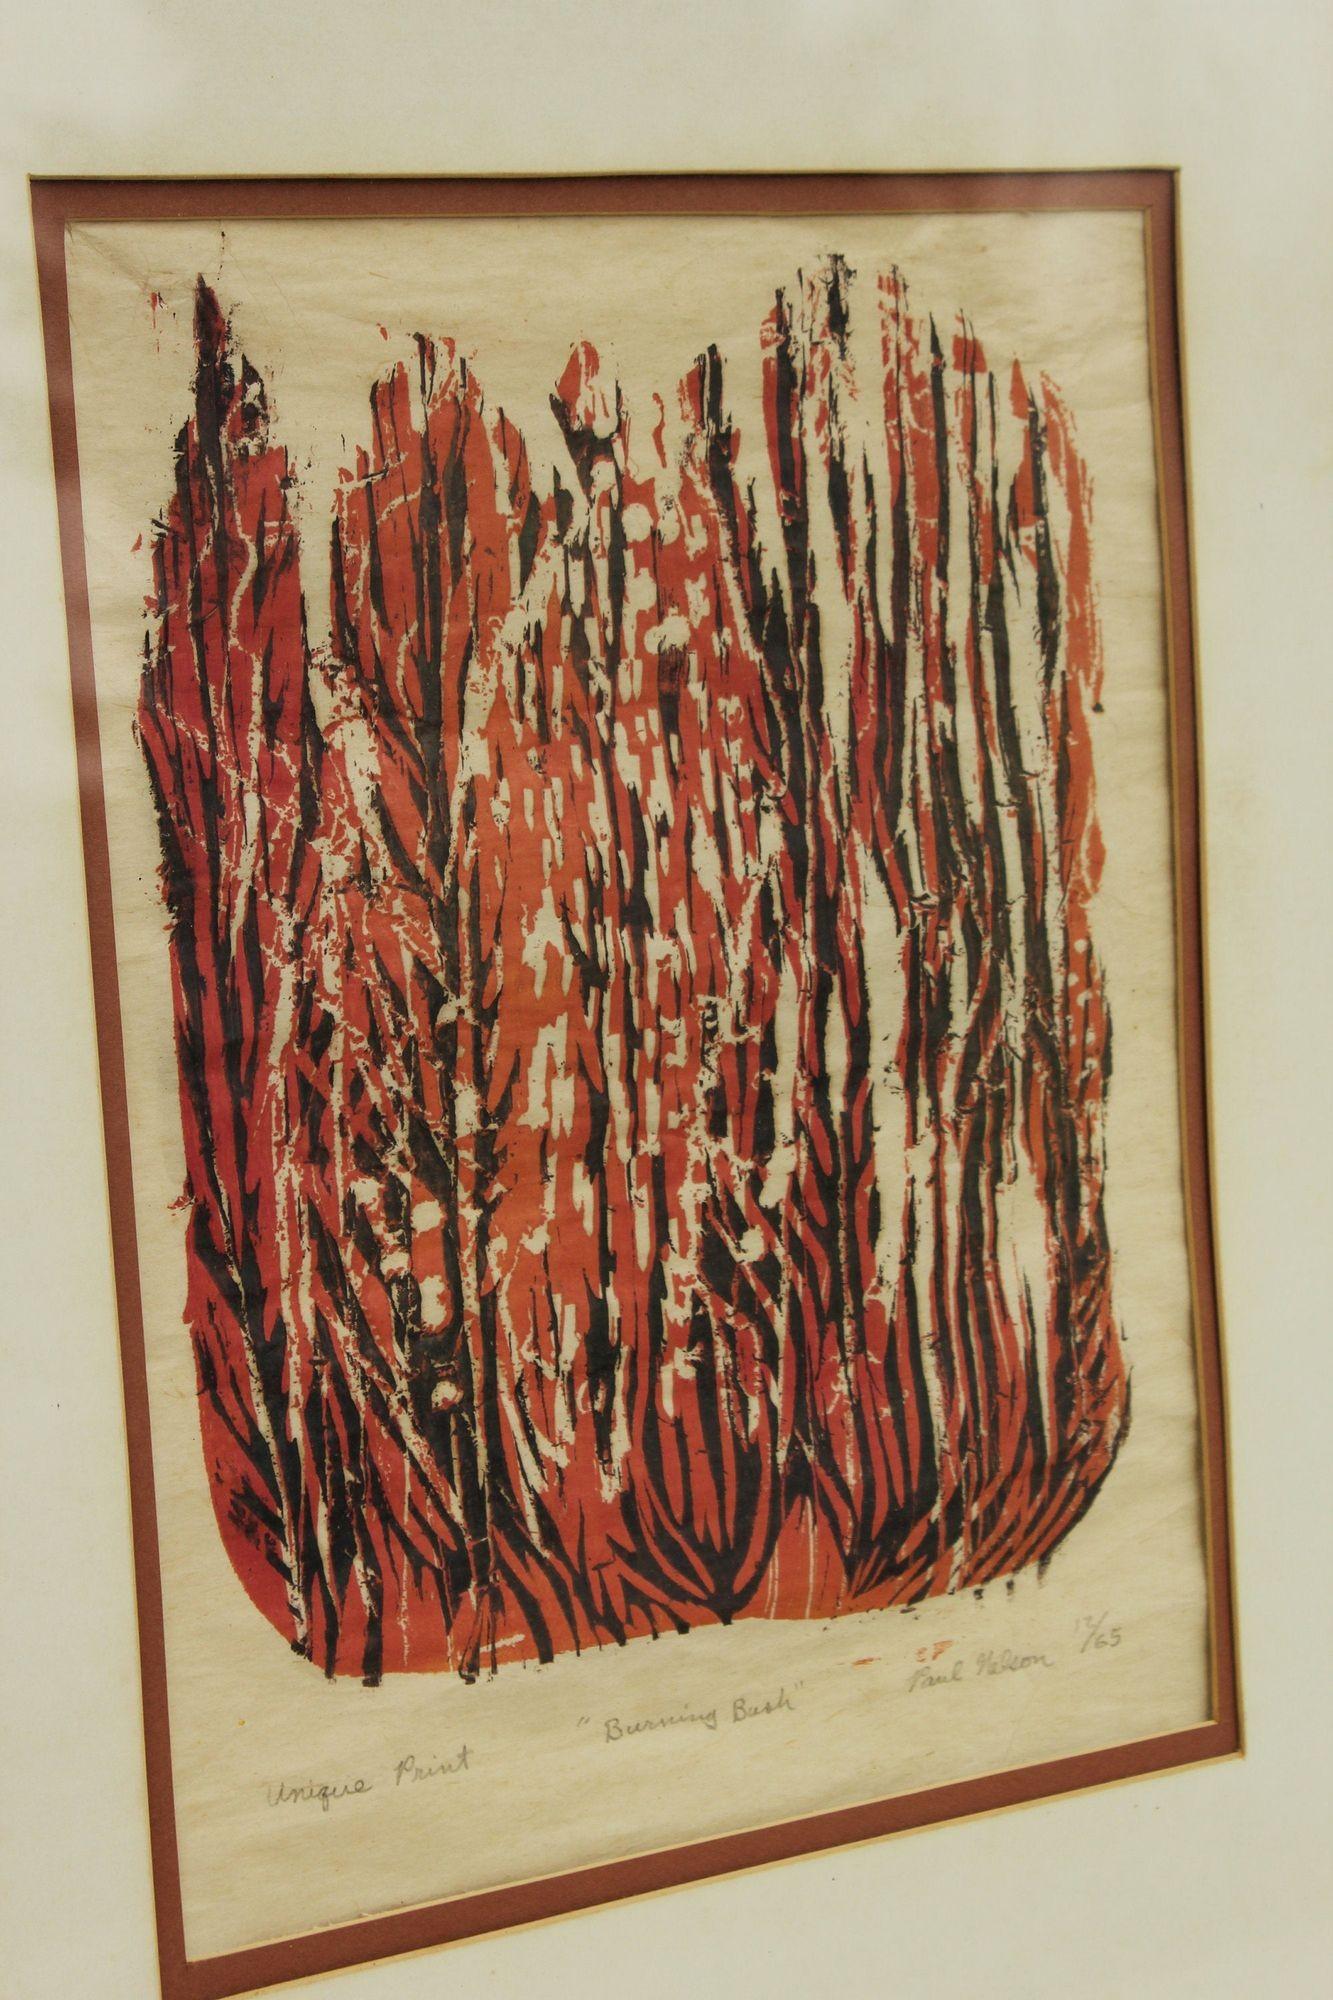 USA, likely 1970s
'Burning Bush' original art signed Paul Nelson, 12/65, nicely matted and framed. Hand signed. 
Dimensions: 19